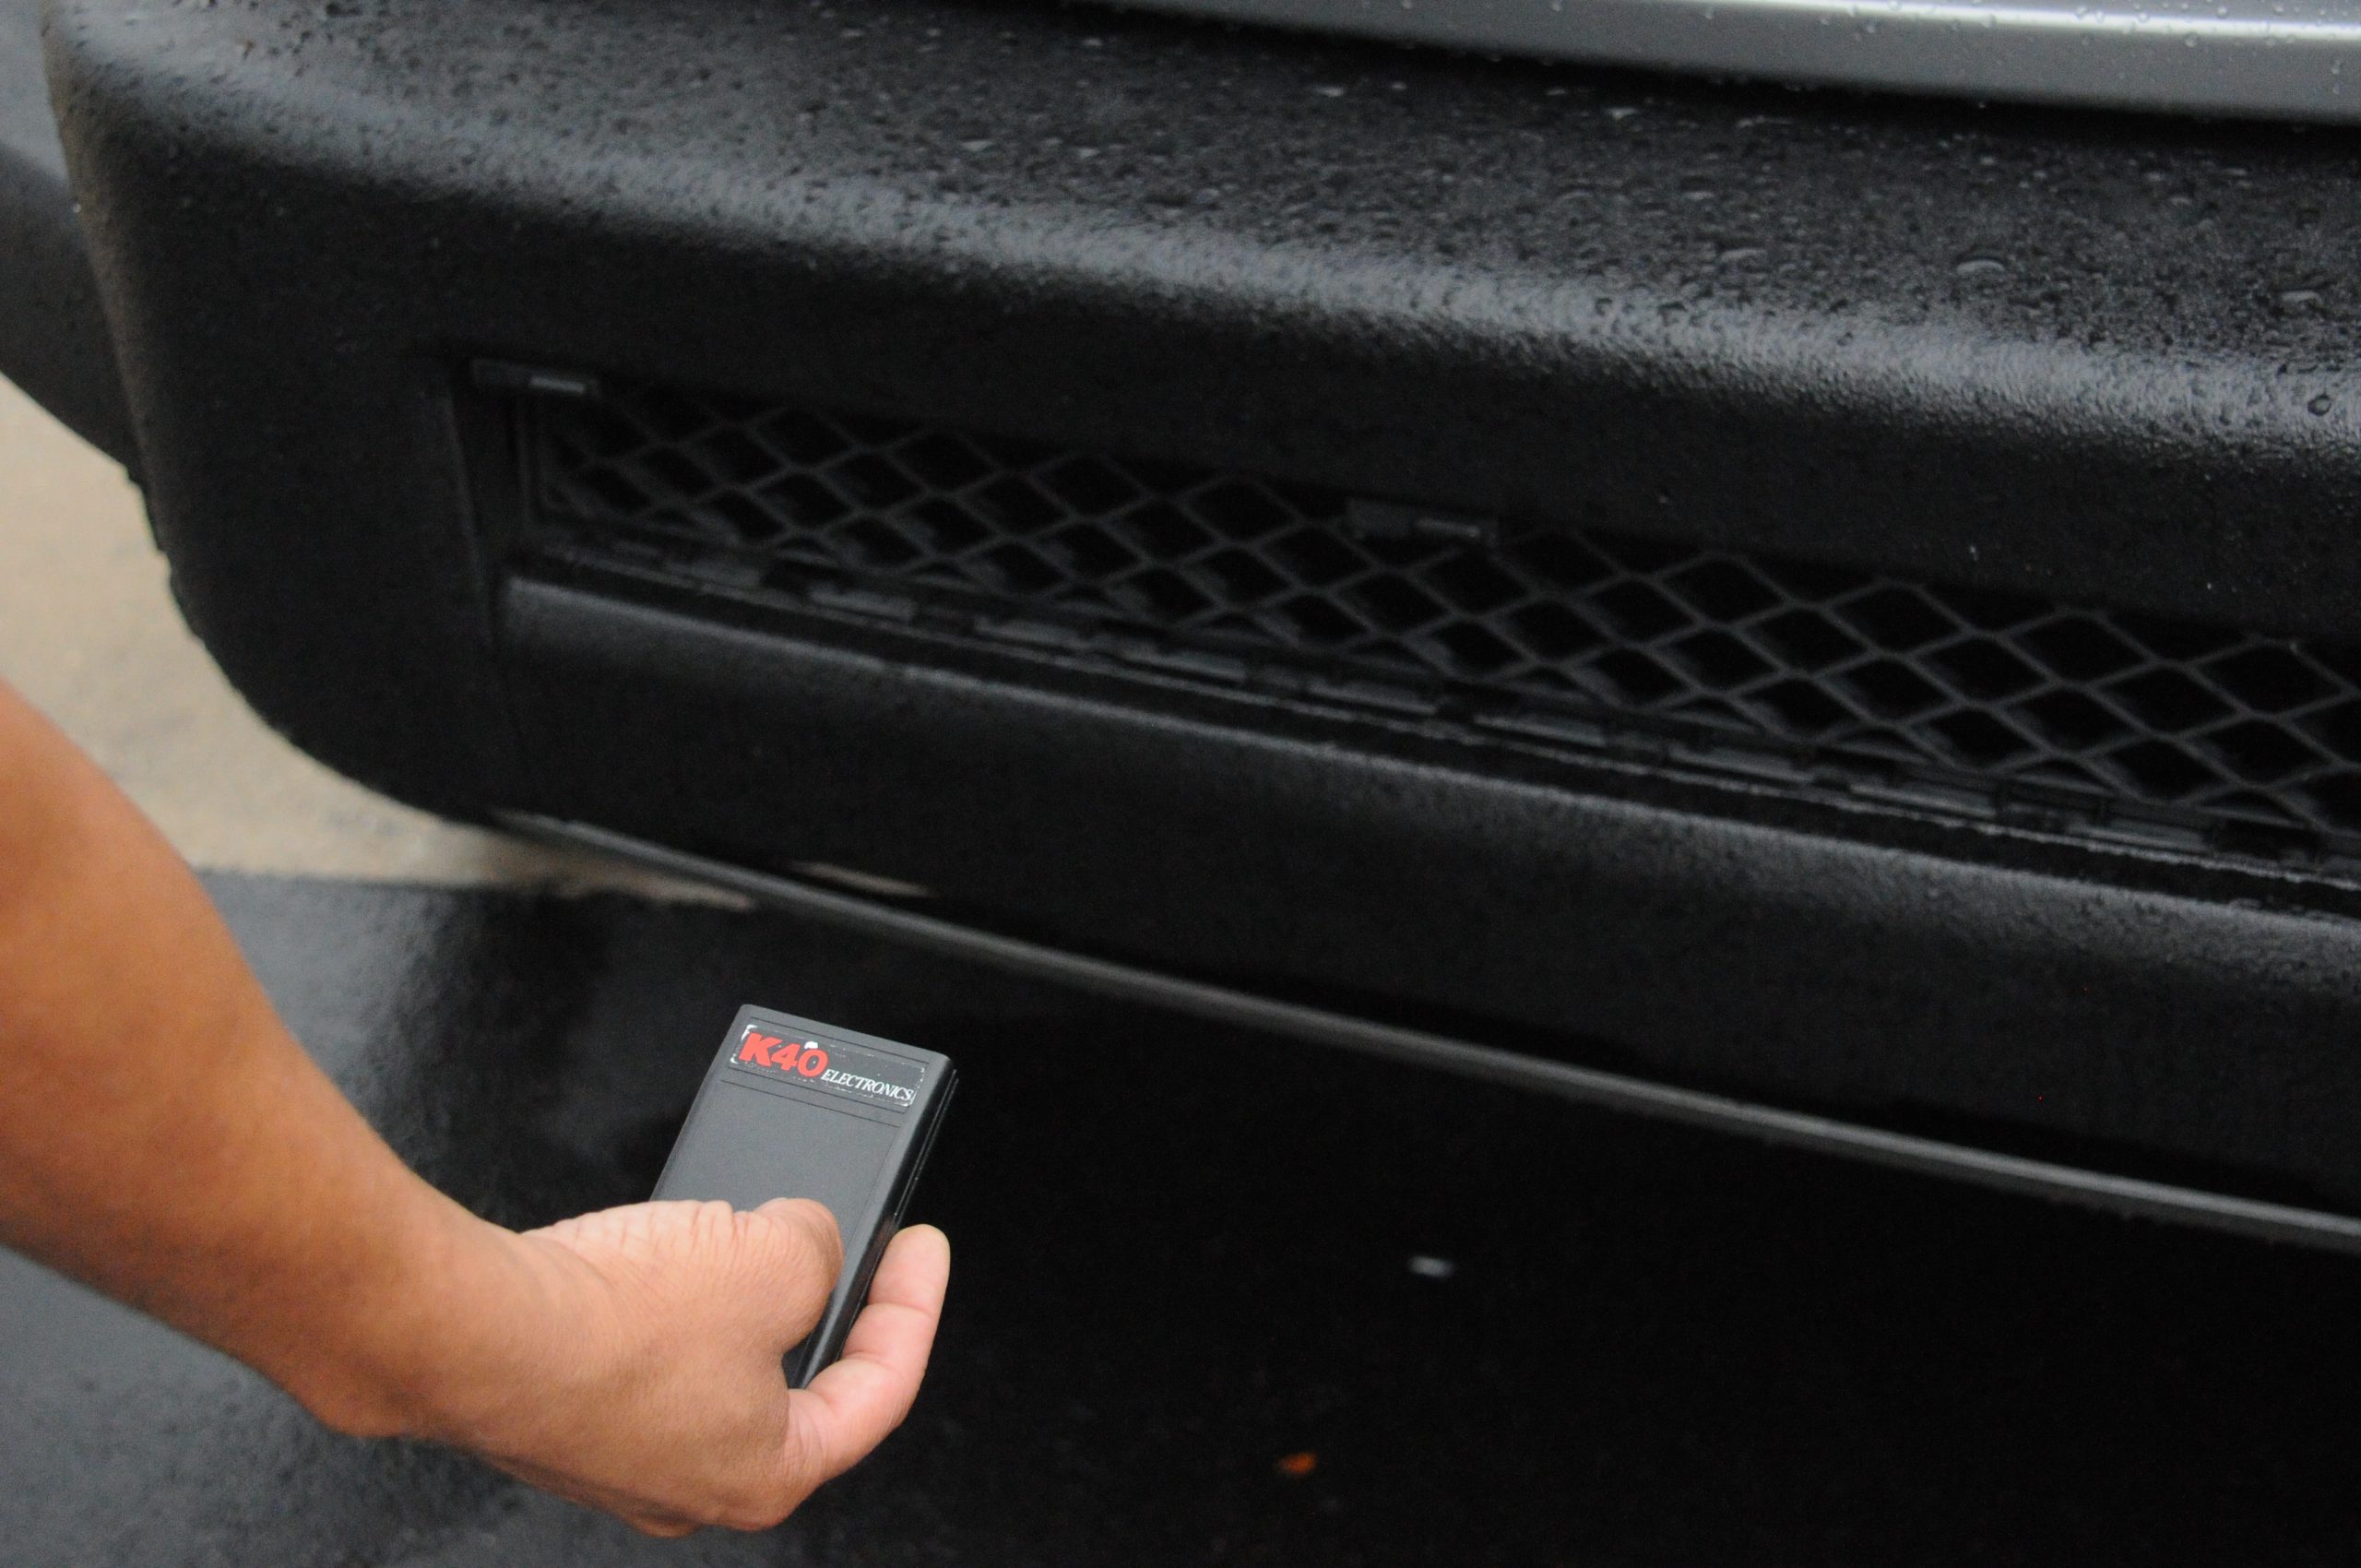 k40 system remote being pointed to toyota bumper